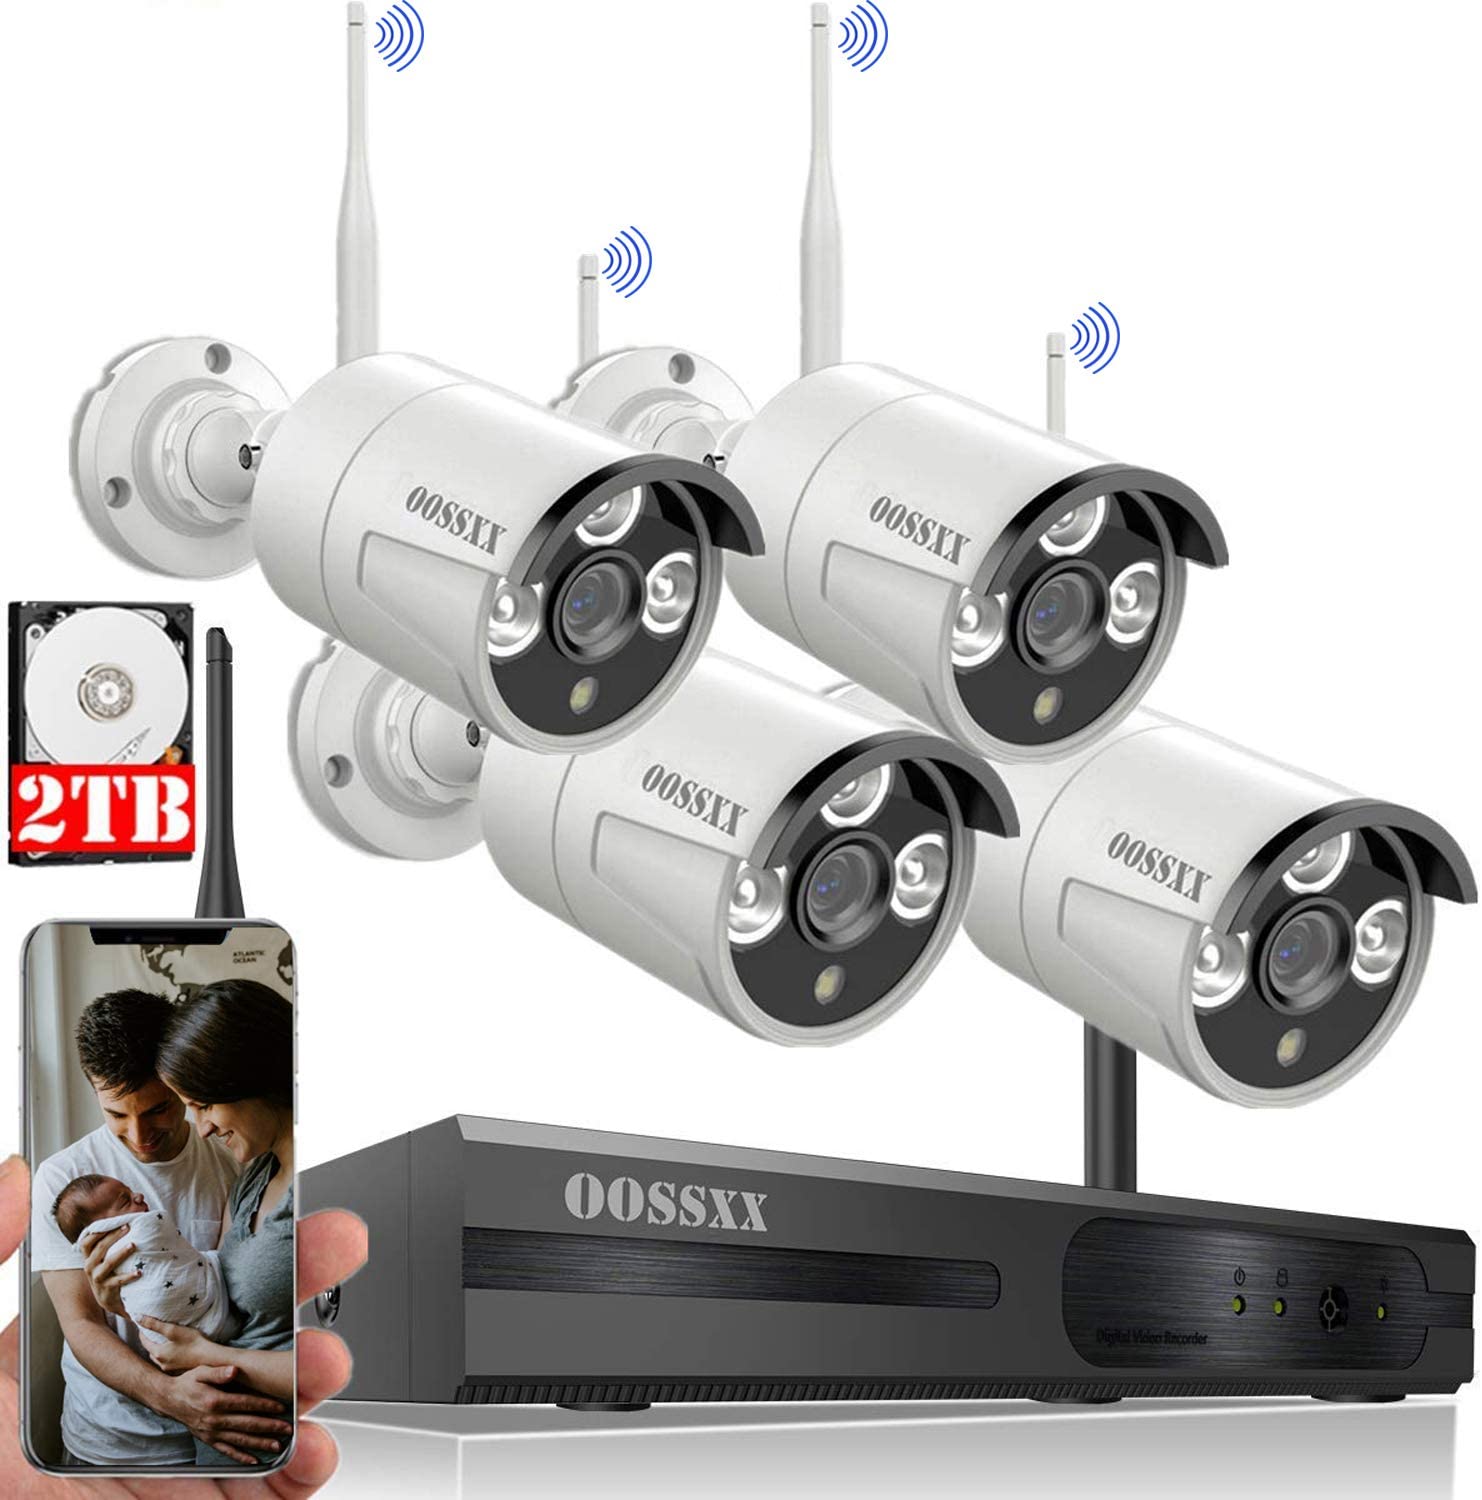 OOSSXX One-Way Audio 1080P Home Security Camera System